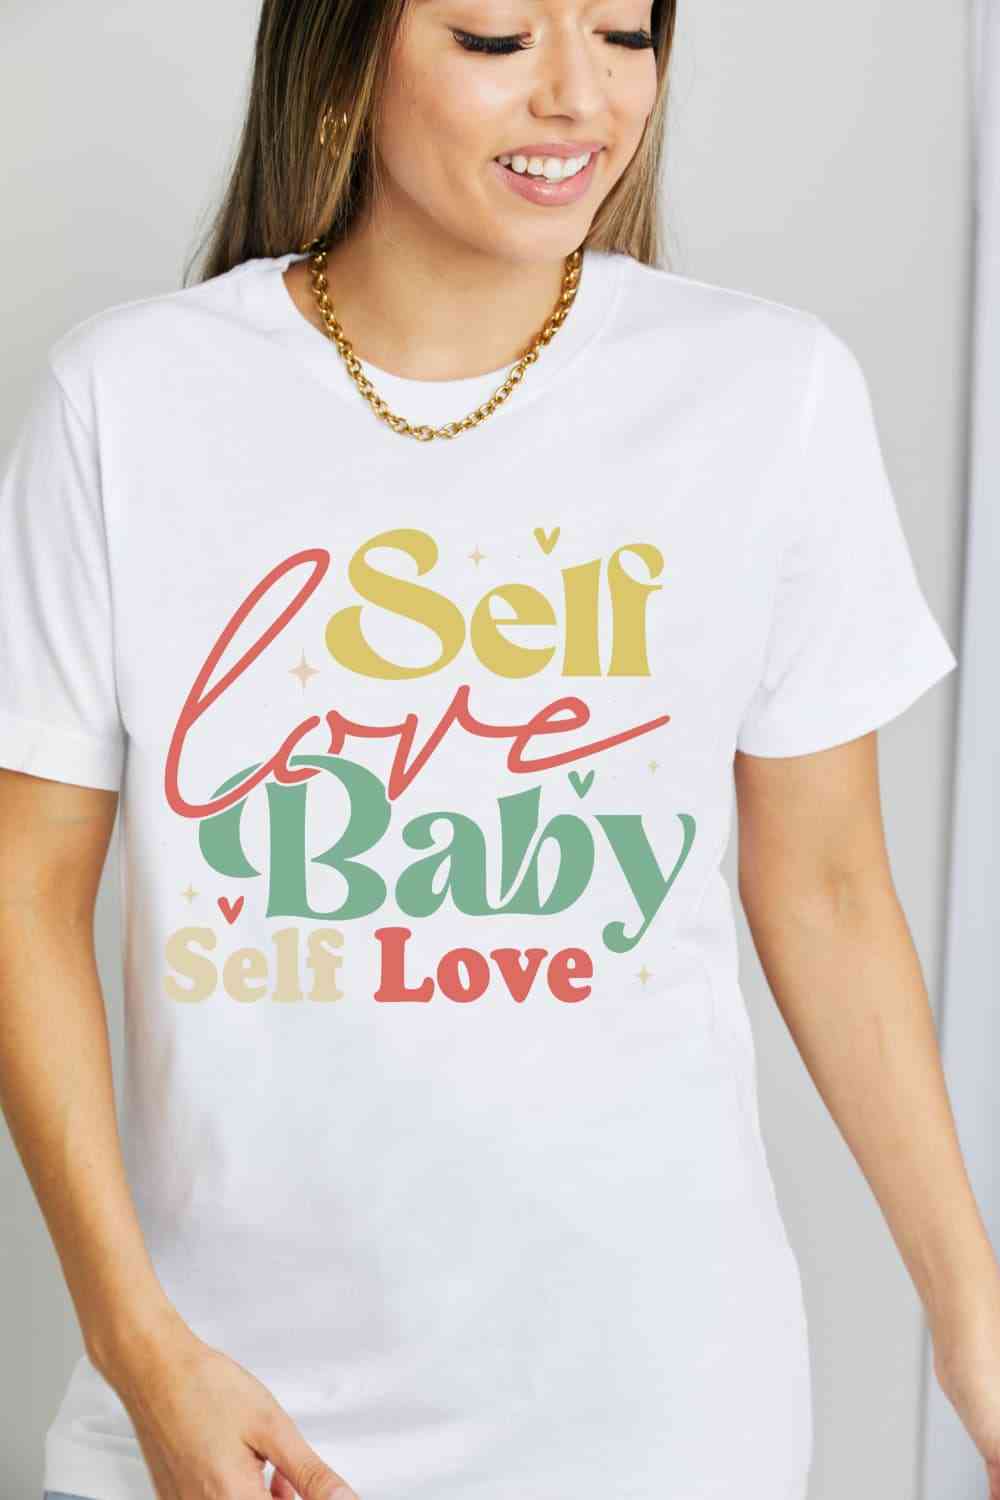 Simply Love SELF LOVE BABY SELF LOVE Graphic Cotton T-Shirt